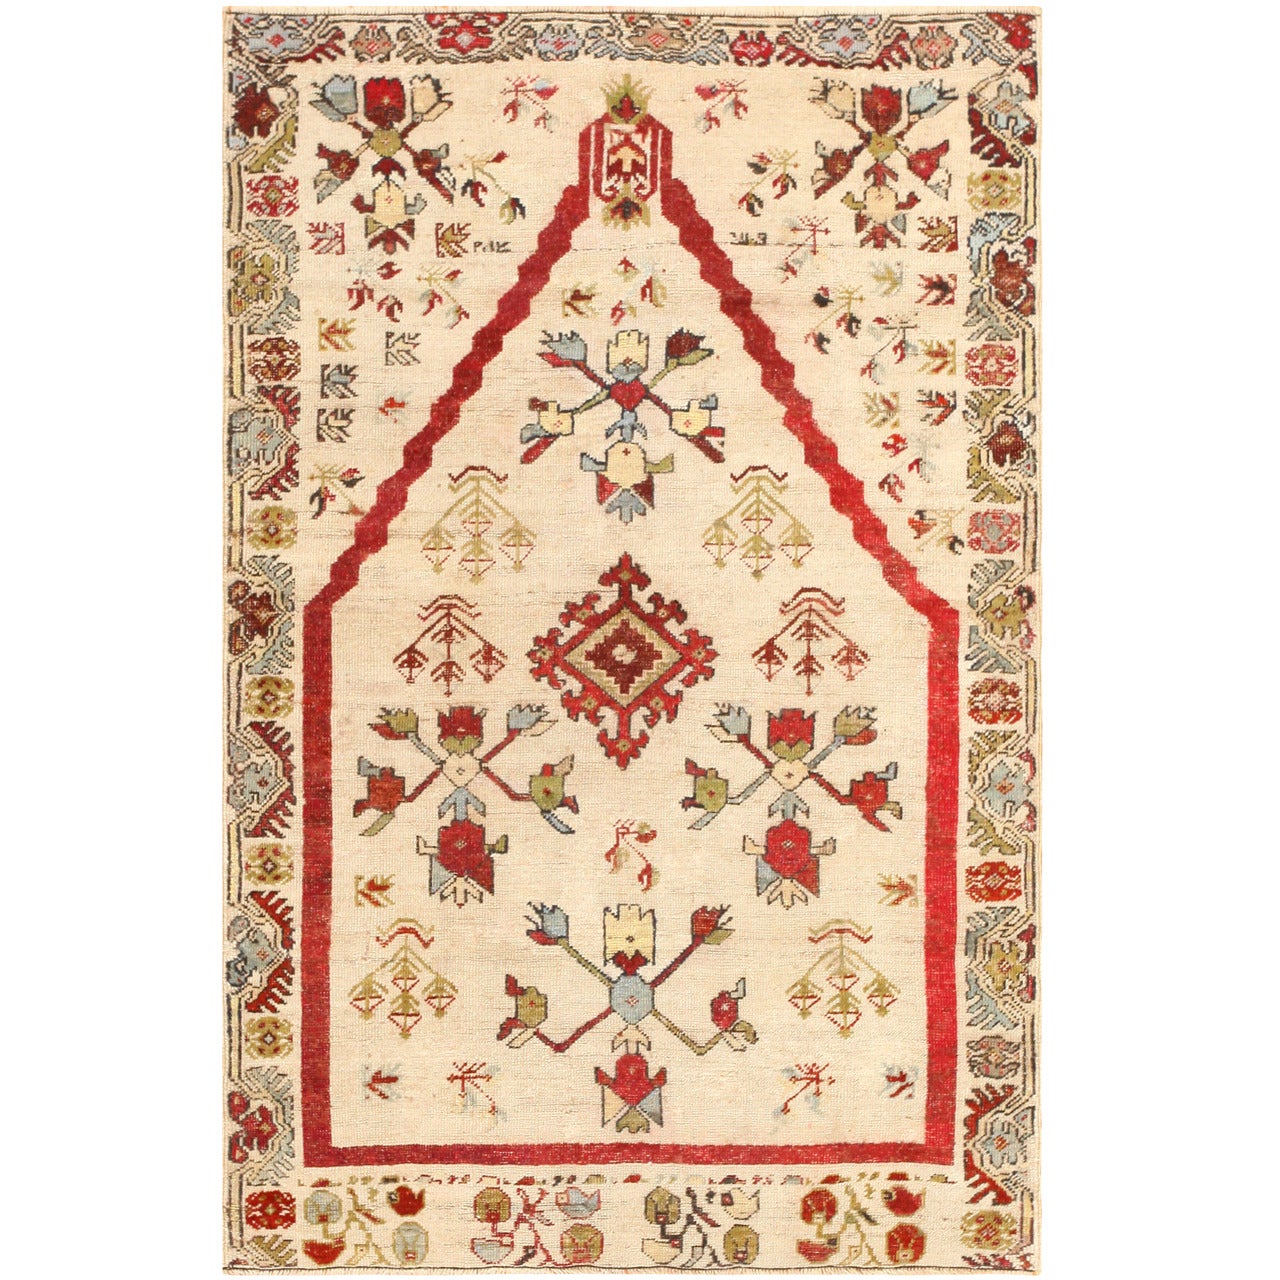 Small Antique Ivory Turkish Kirshehir Prayer Rug. Size: 3 ft 4 in x 5 ft